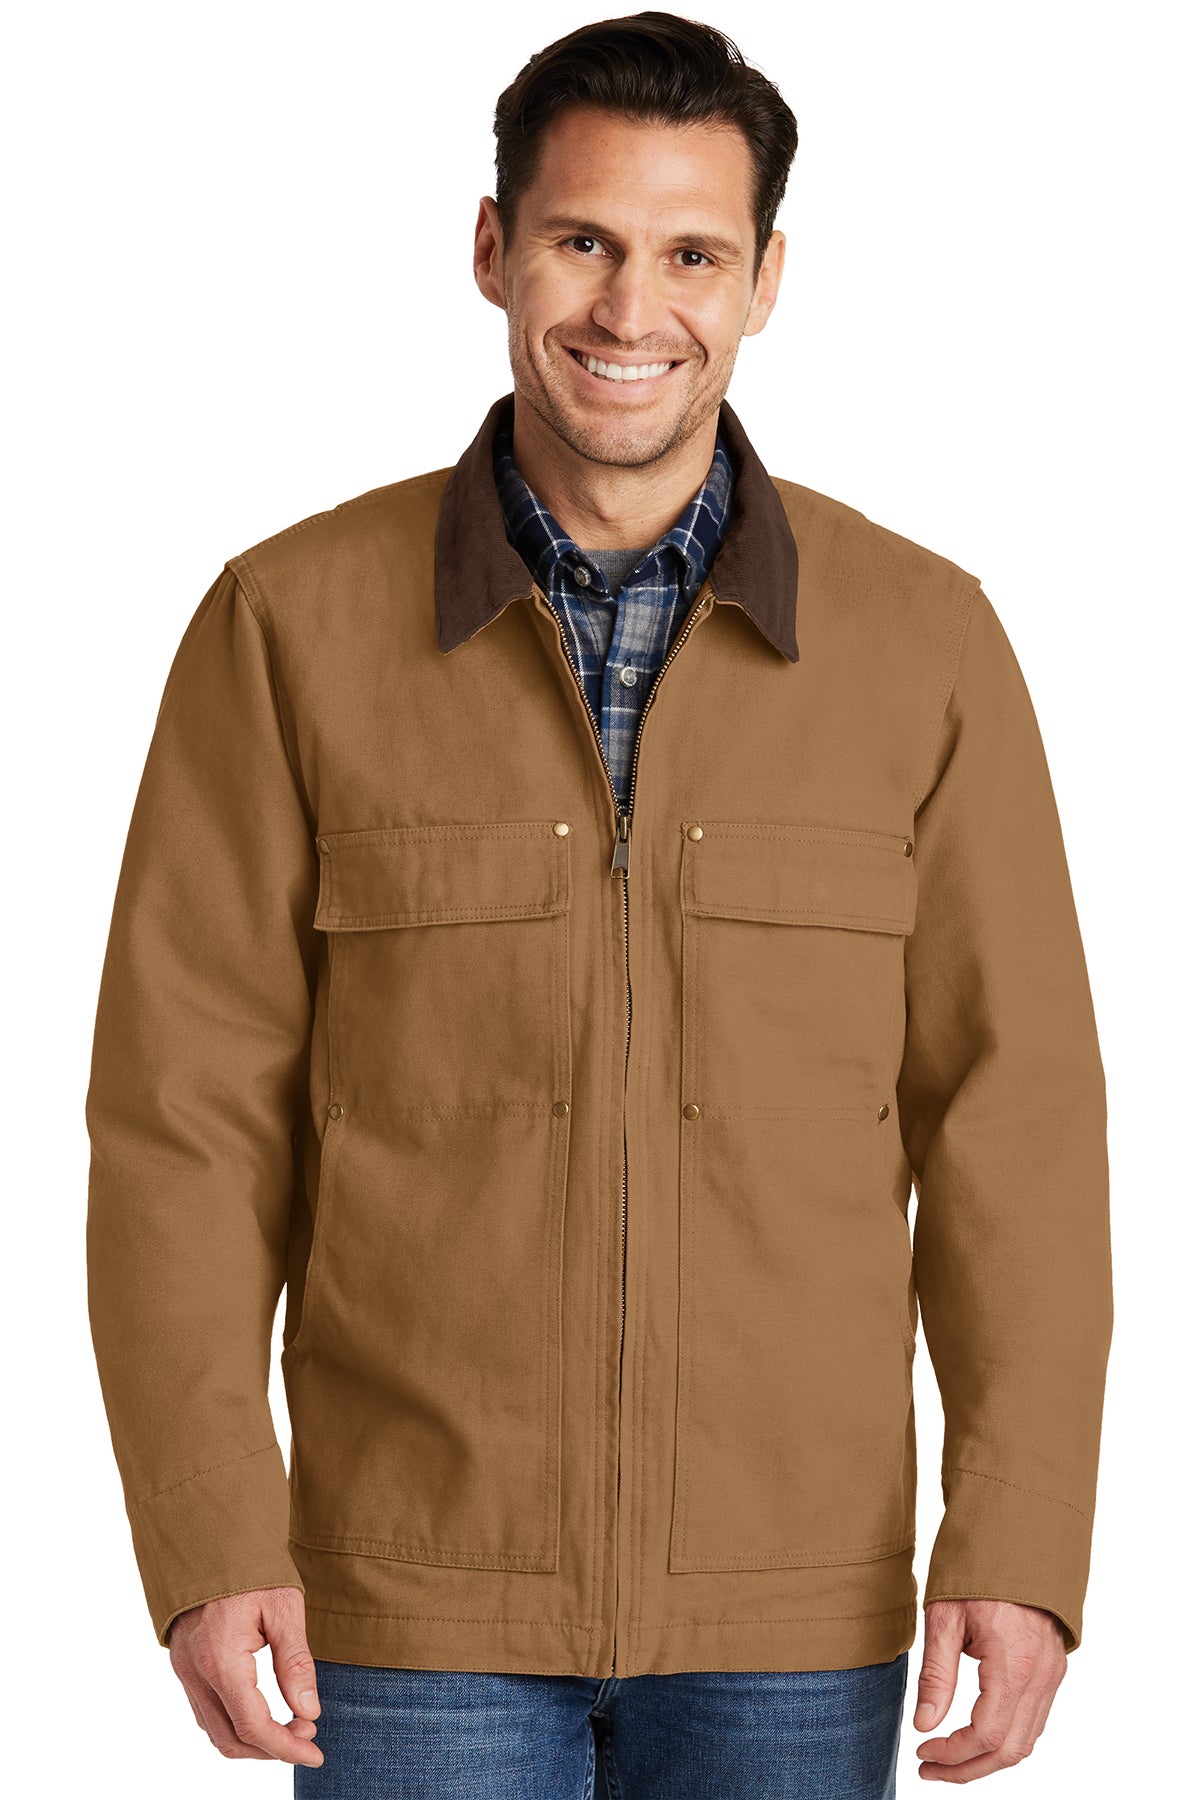 Buy duck-brown CornerStone Washed Duck Cloth Chore Coat